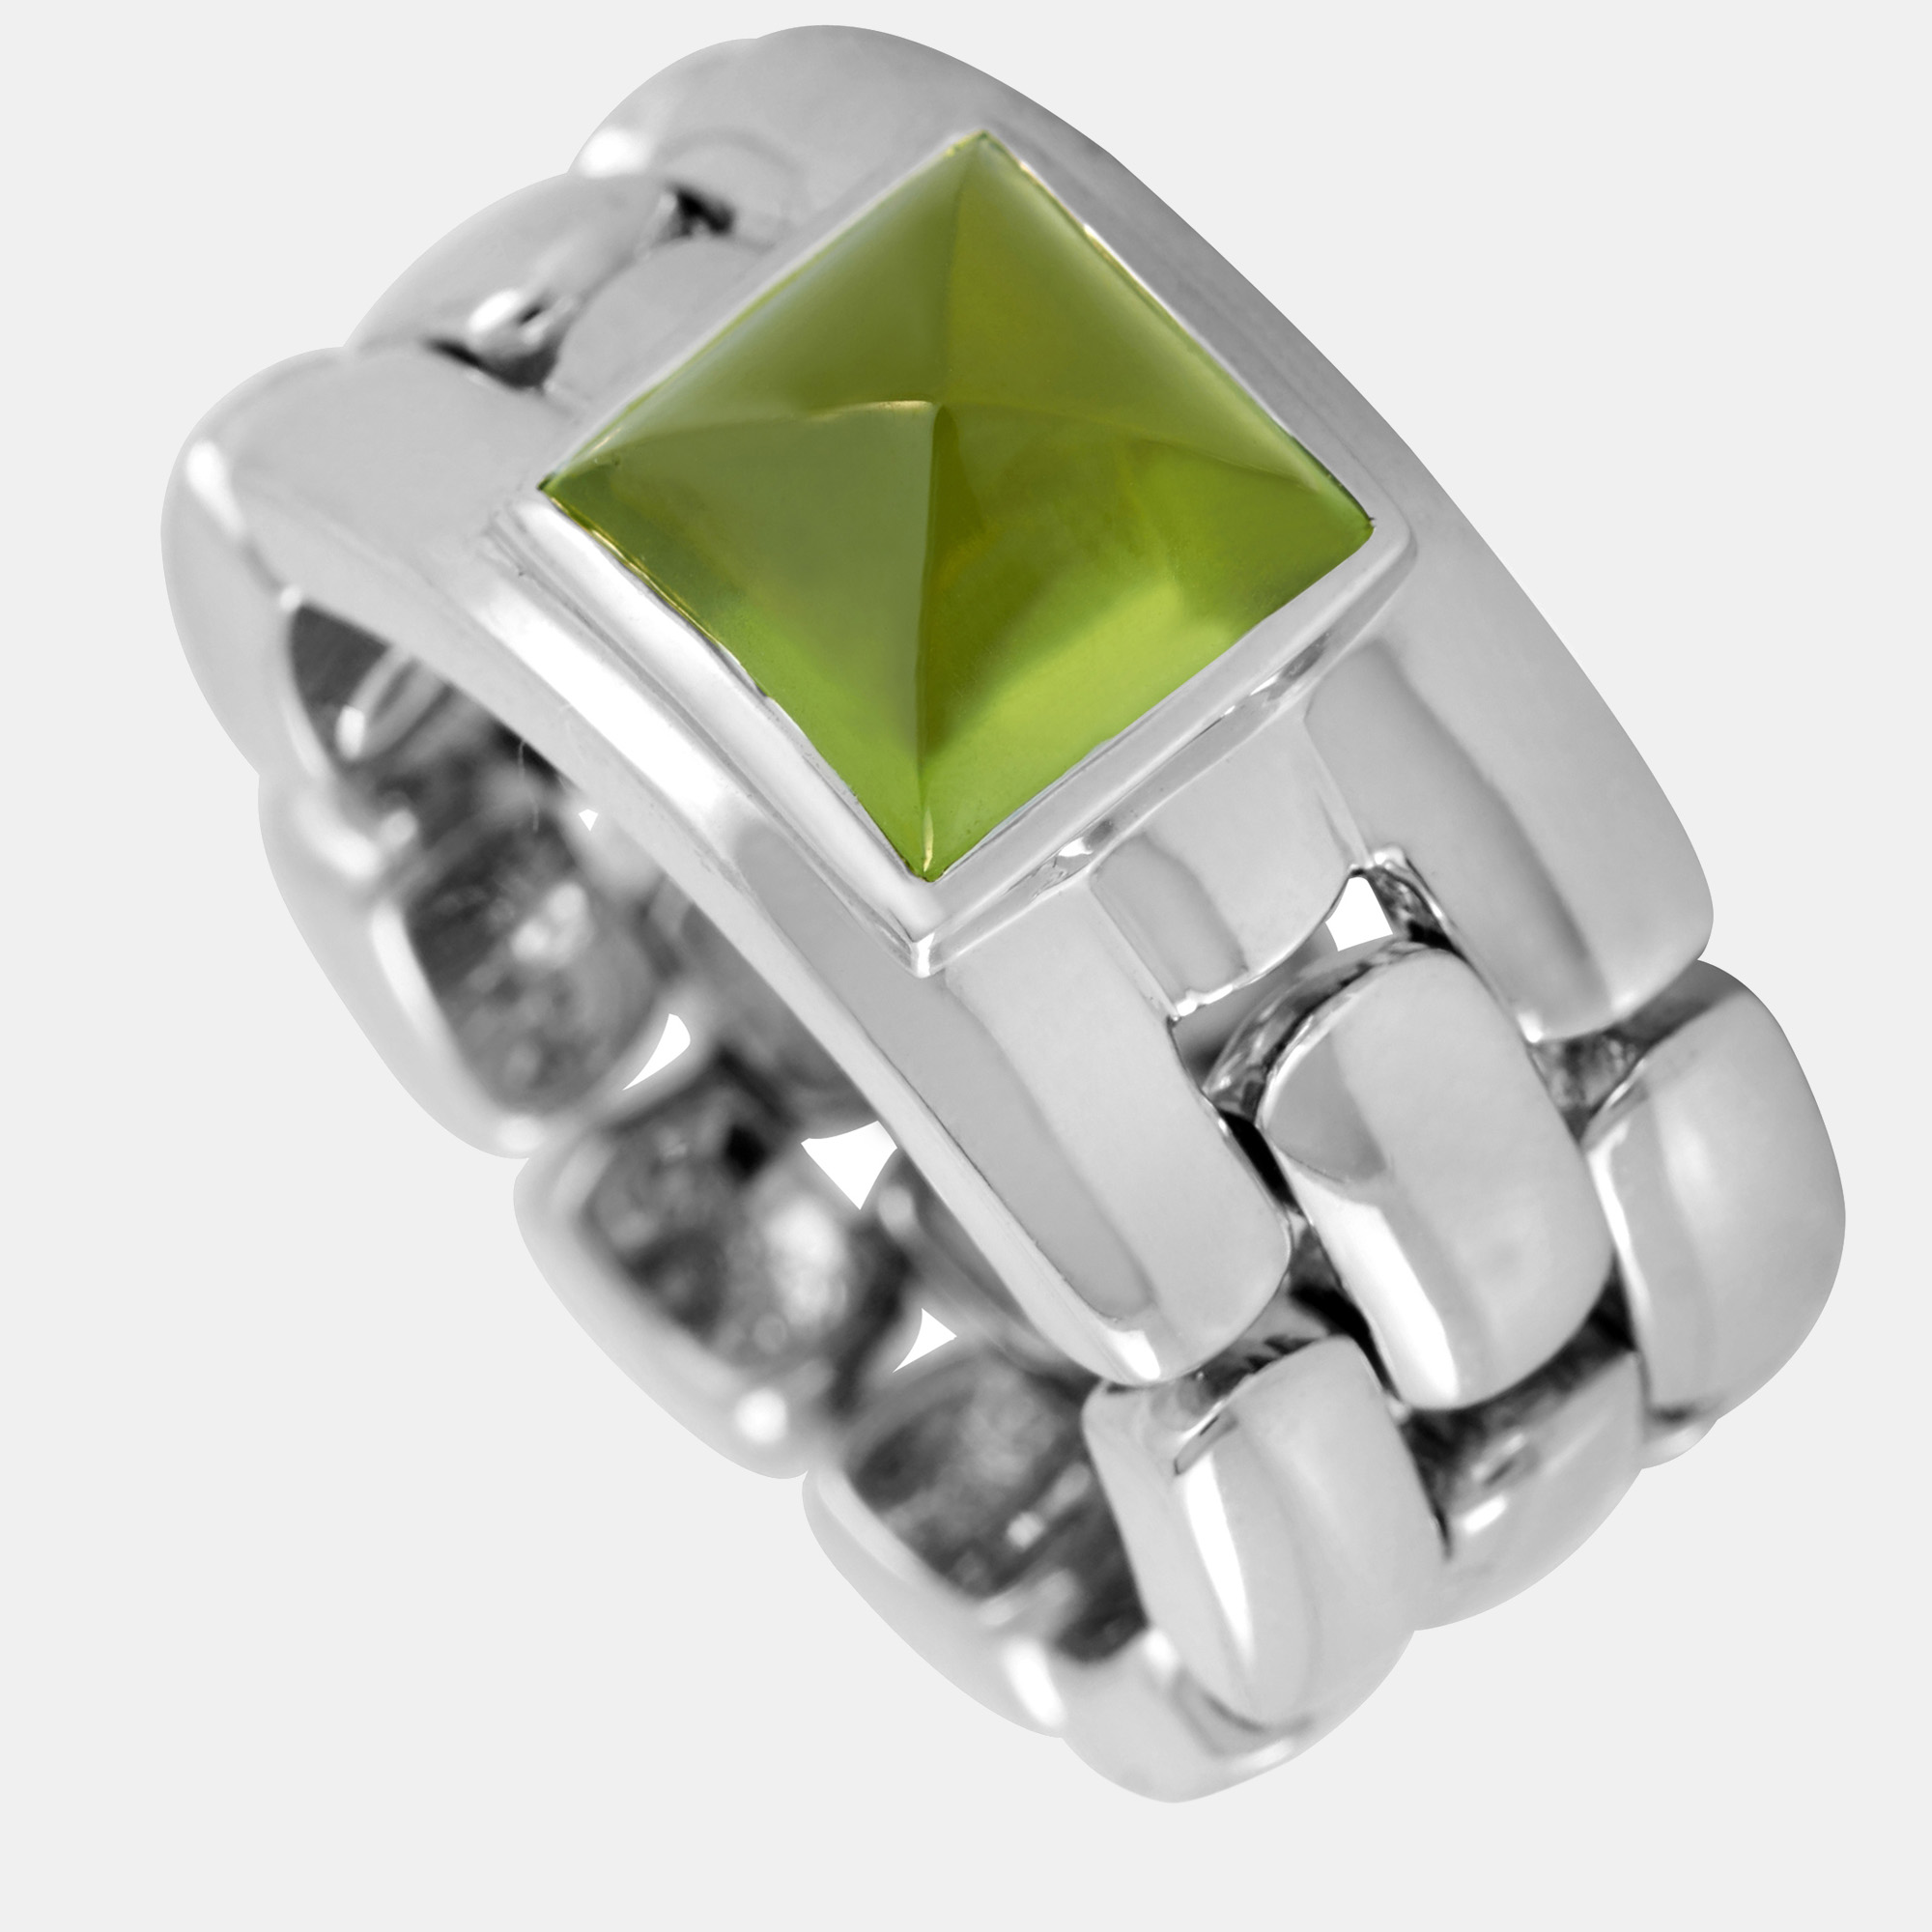 This Chaumet ring is made of 18K white gold and embellished with a peridot. The ring weighs 21.1 grams and boasts band thickness of 11 mm and top height of 6 mm while top dimensions measure 8 by 8 mm.